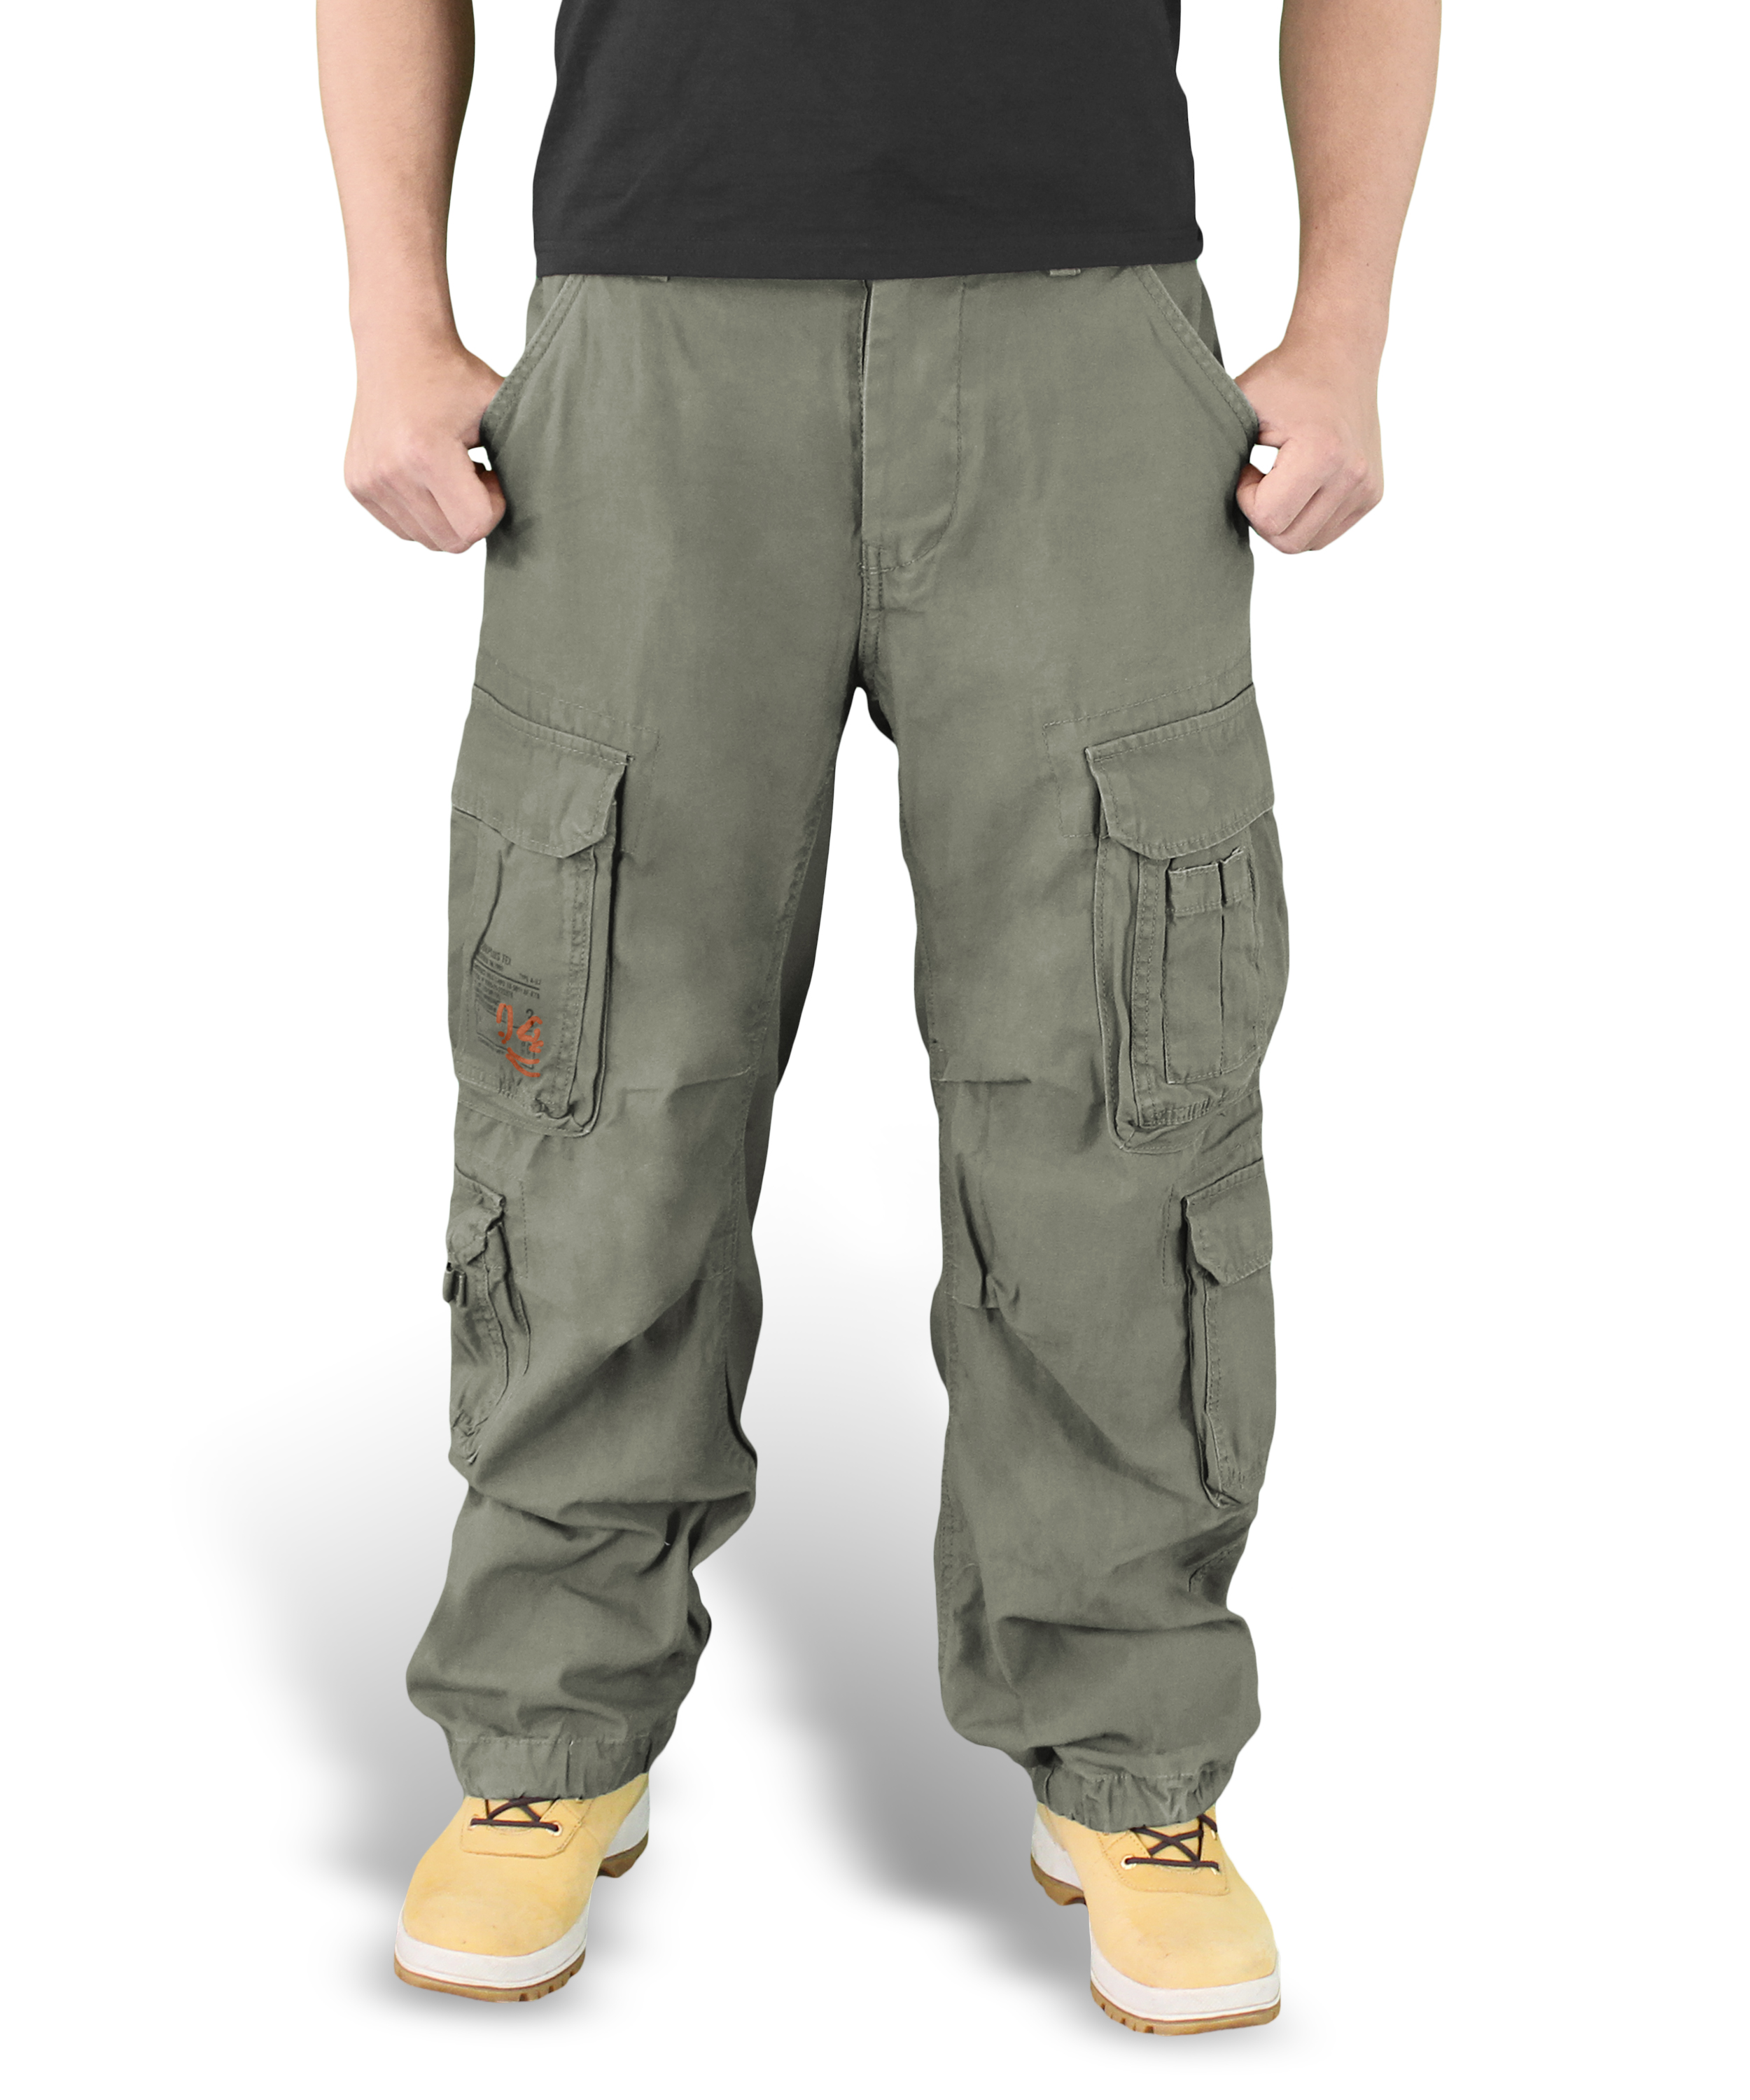 SURPLUS AIRBORNE TROUSERS OLIVE GREEN RAW VINTAGE CARGO COMBAT PANTS ...